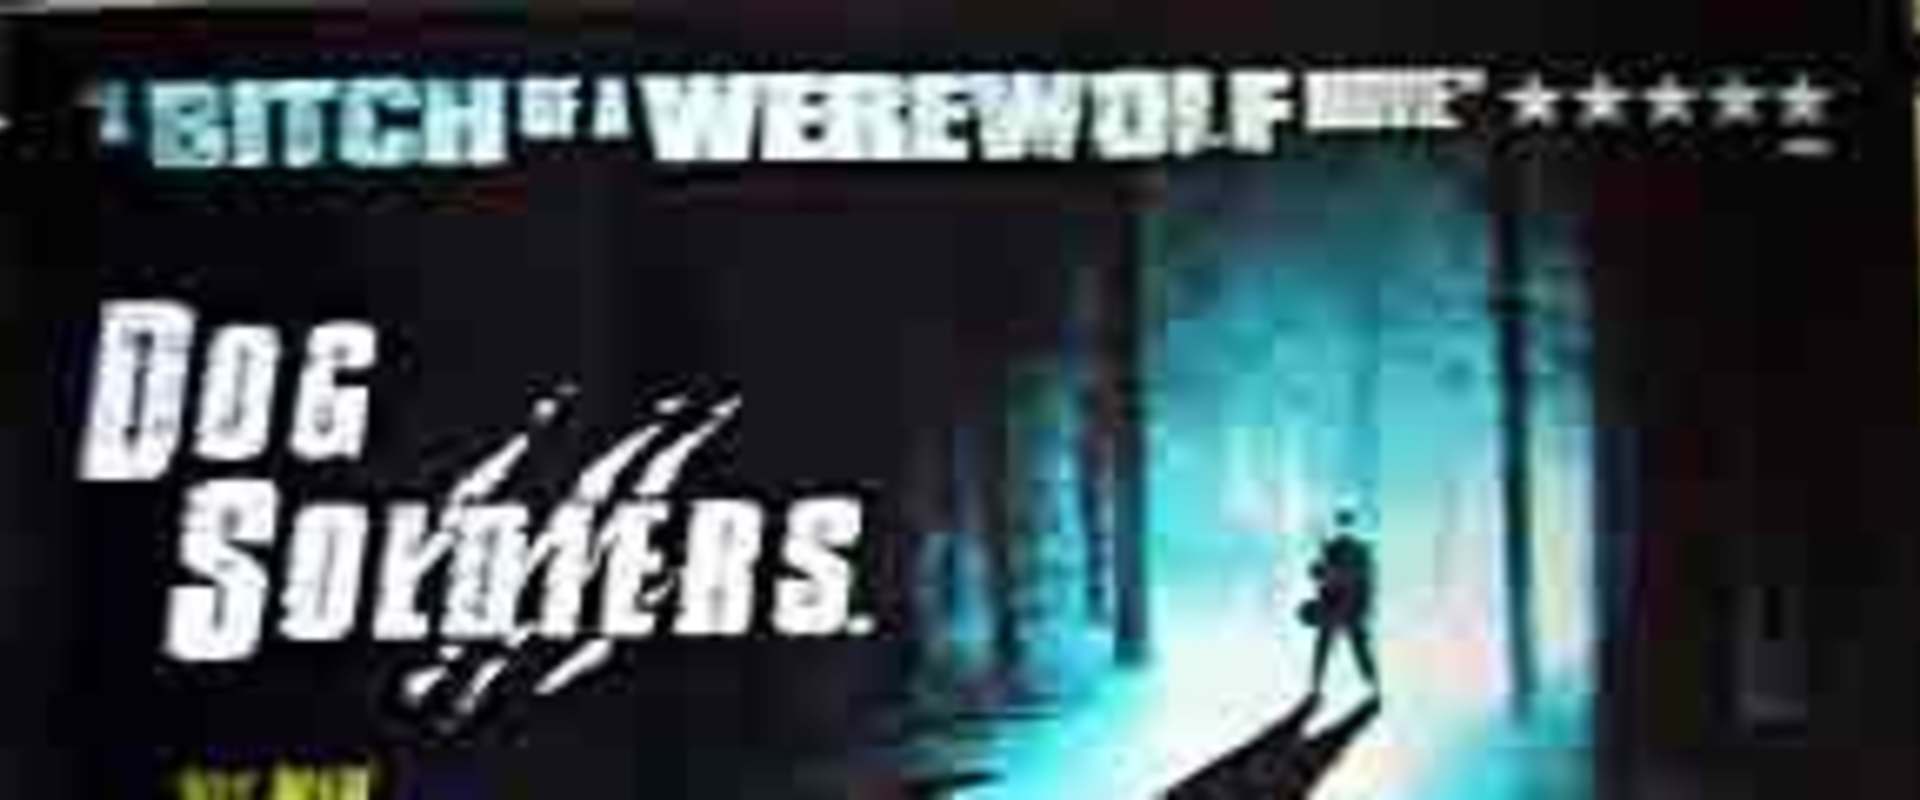 Dog Soldiers background 2